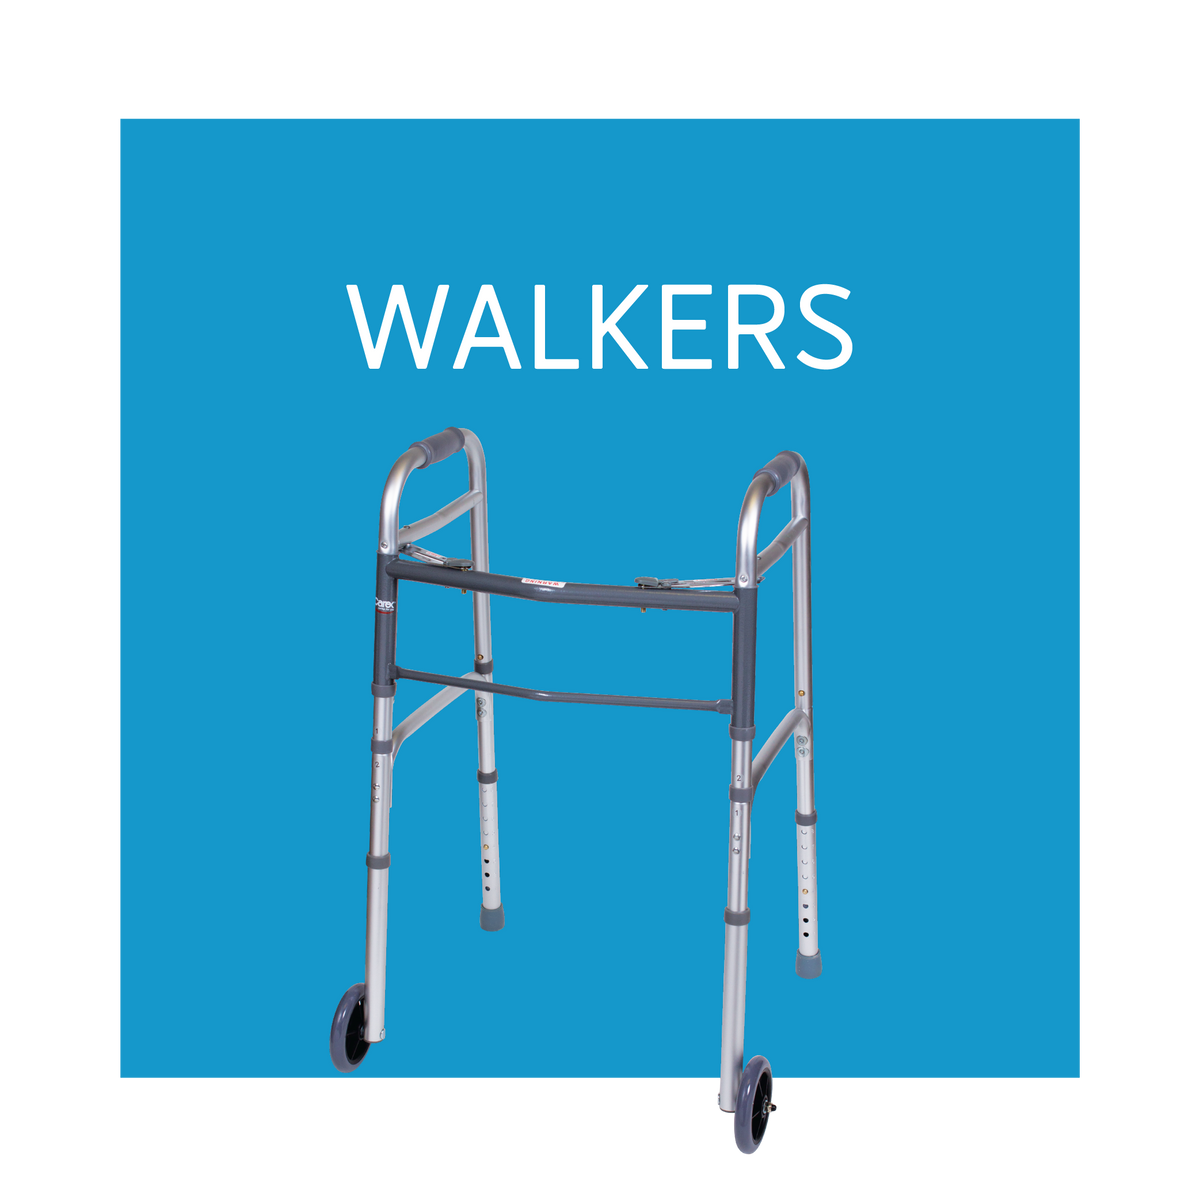 Gray walker on a blue background. Text, “Walkers”